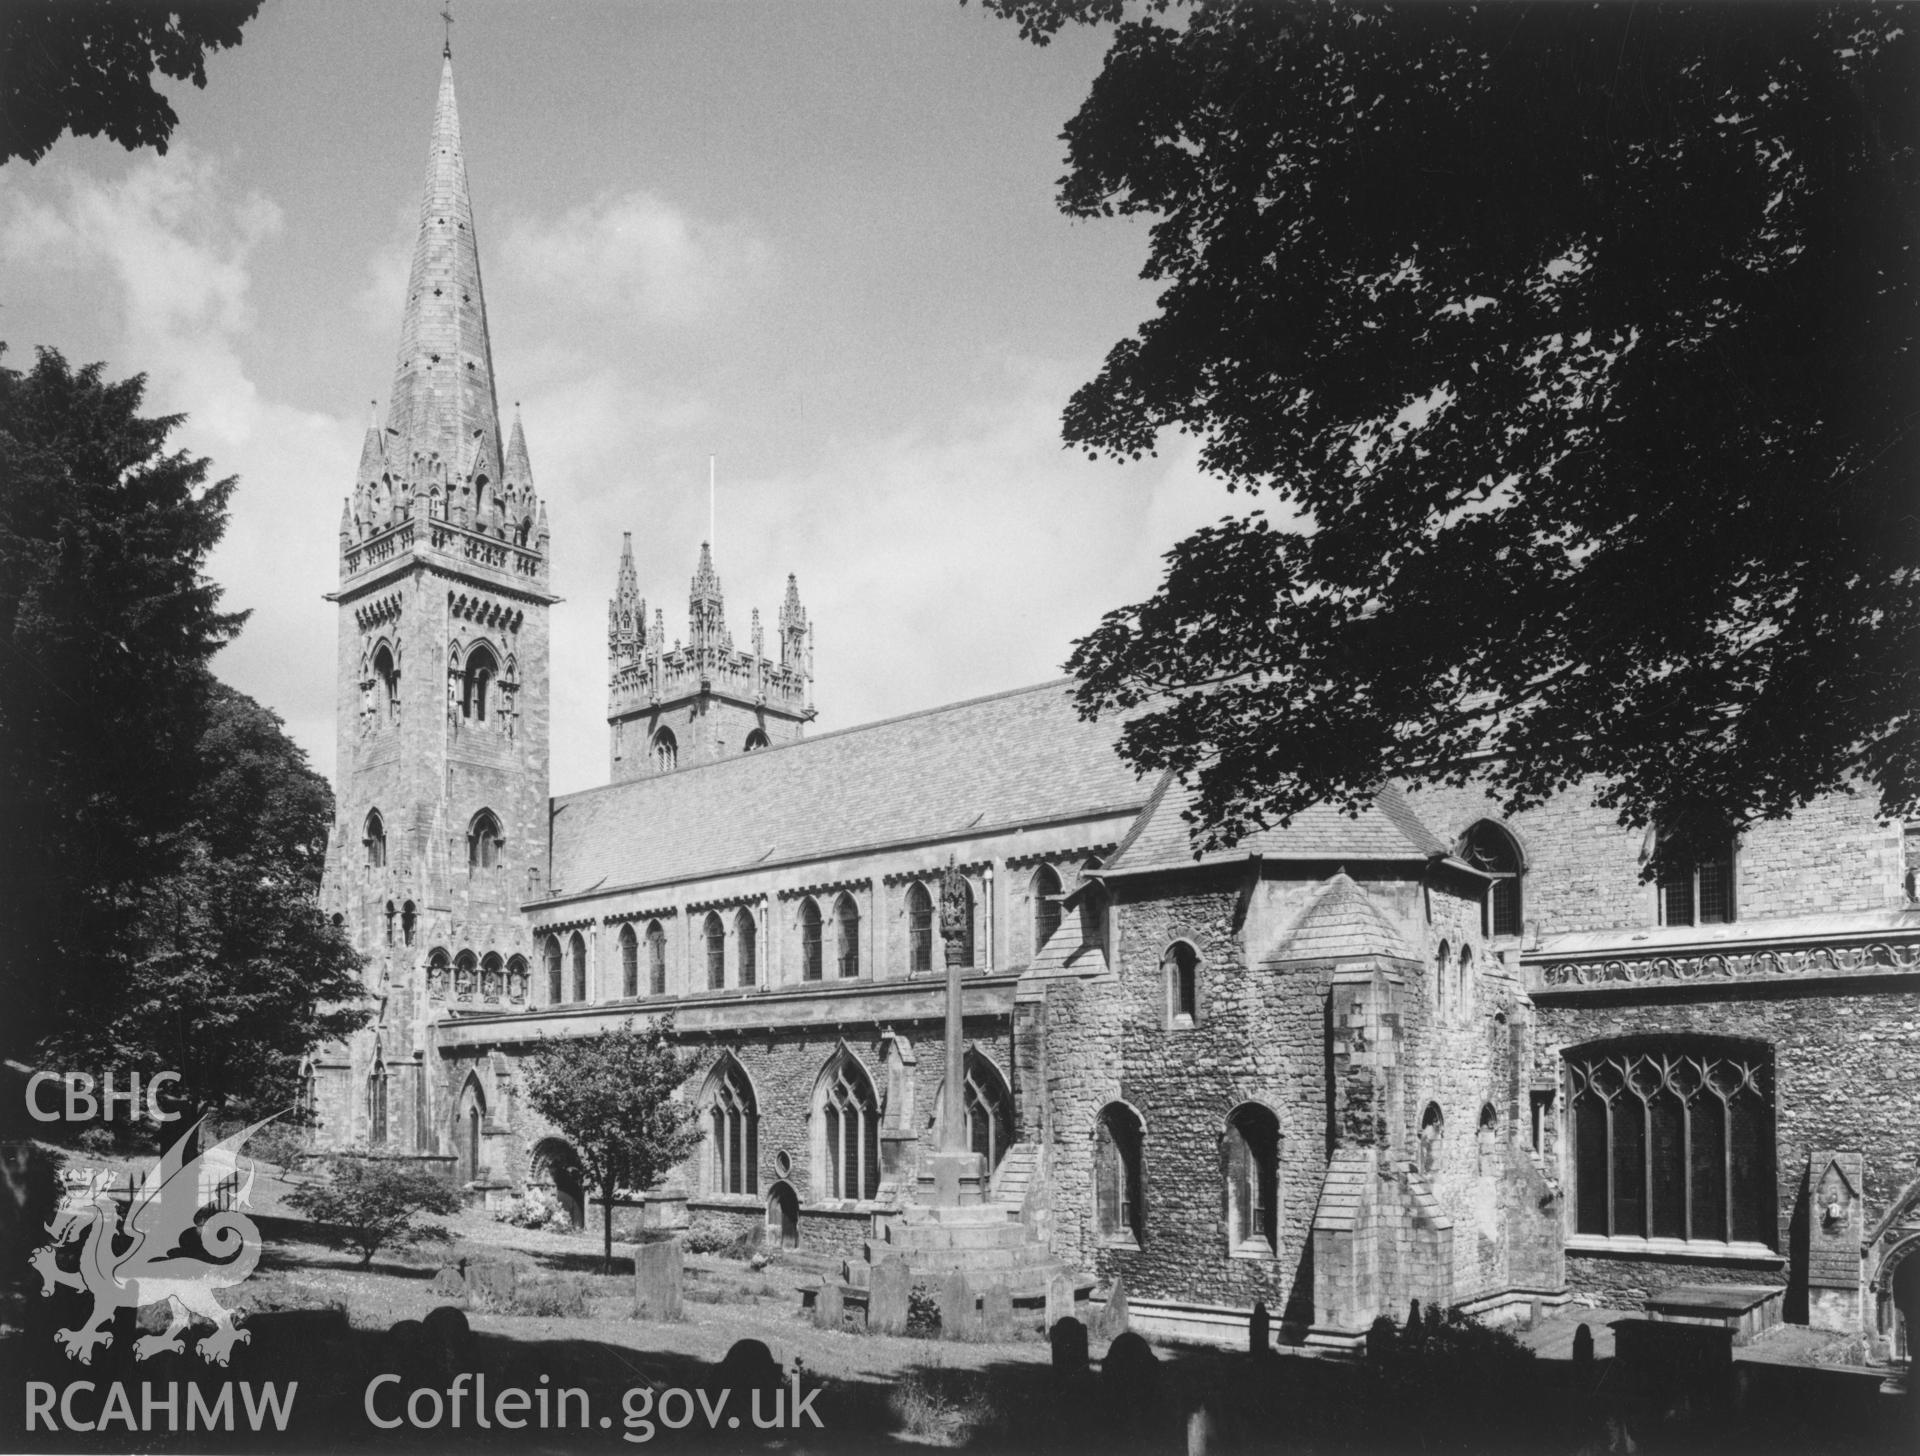 1 b/w print showing exterior view of Llandaff Cathedral, Cardiff; collated by the former Central Office of Information.